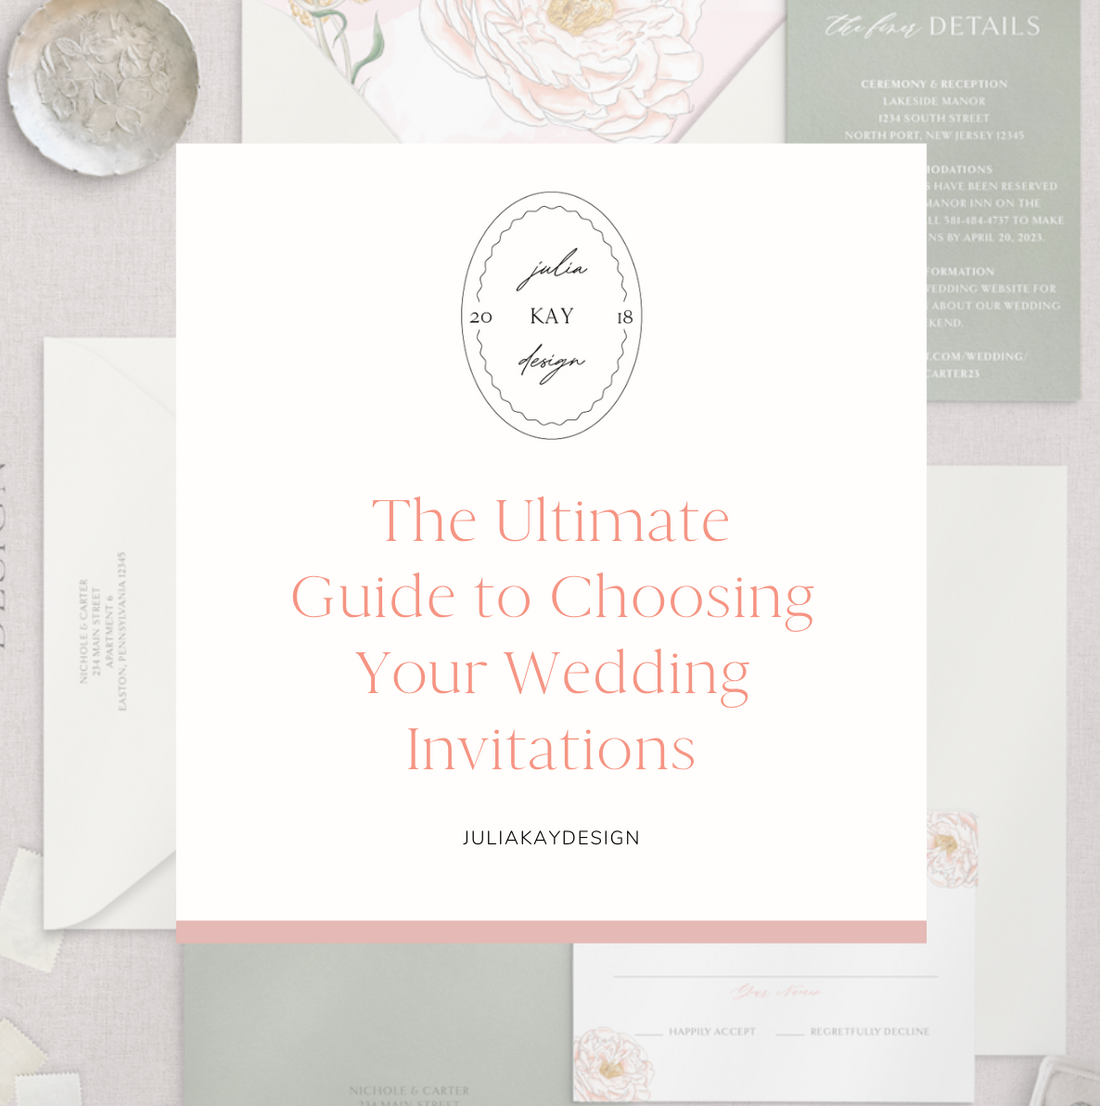 The Ultimate Guide to Choosing Your Wedding Invitations